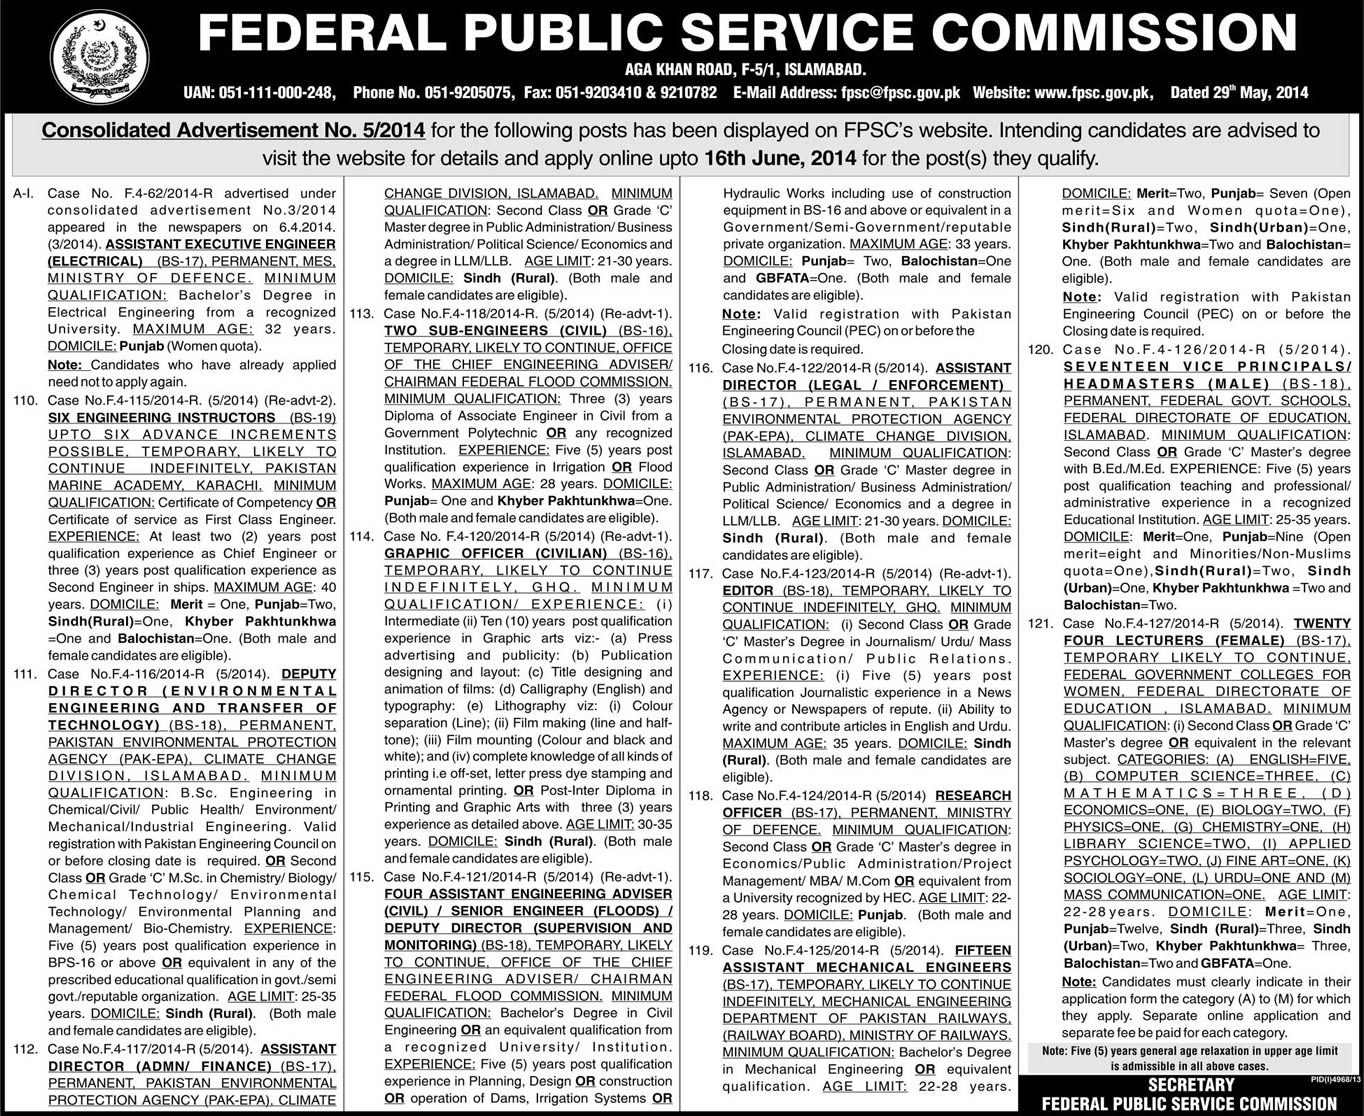 Federal Public Service Commission Jobs June 2014 for Lecturers & Vice Principals in FG Colleges